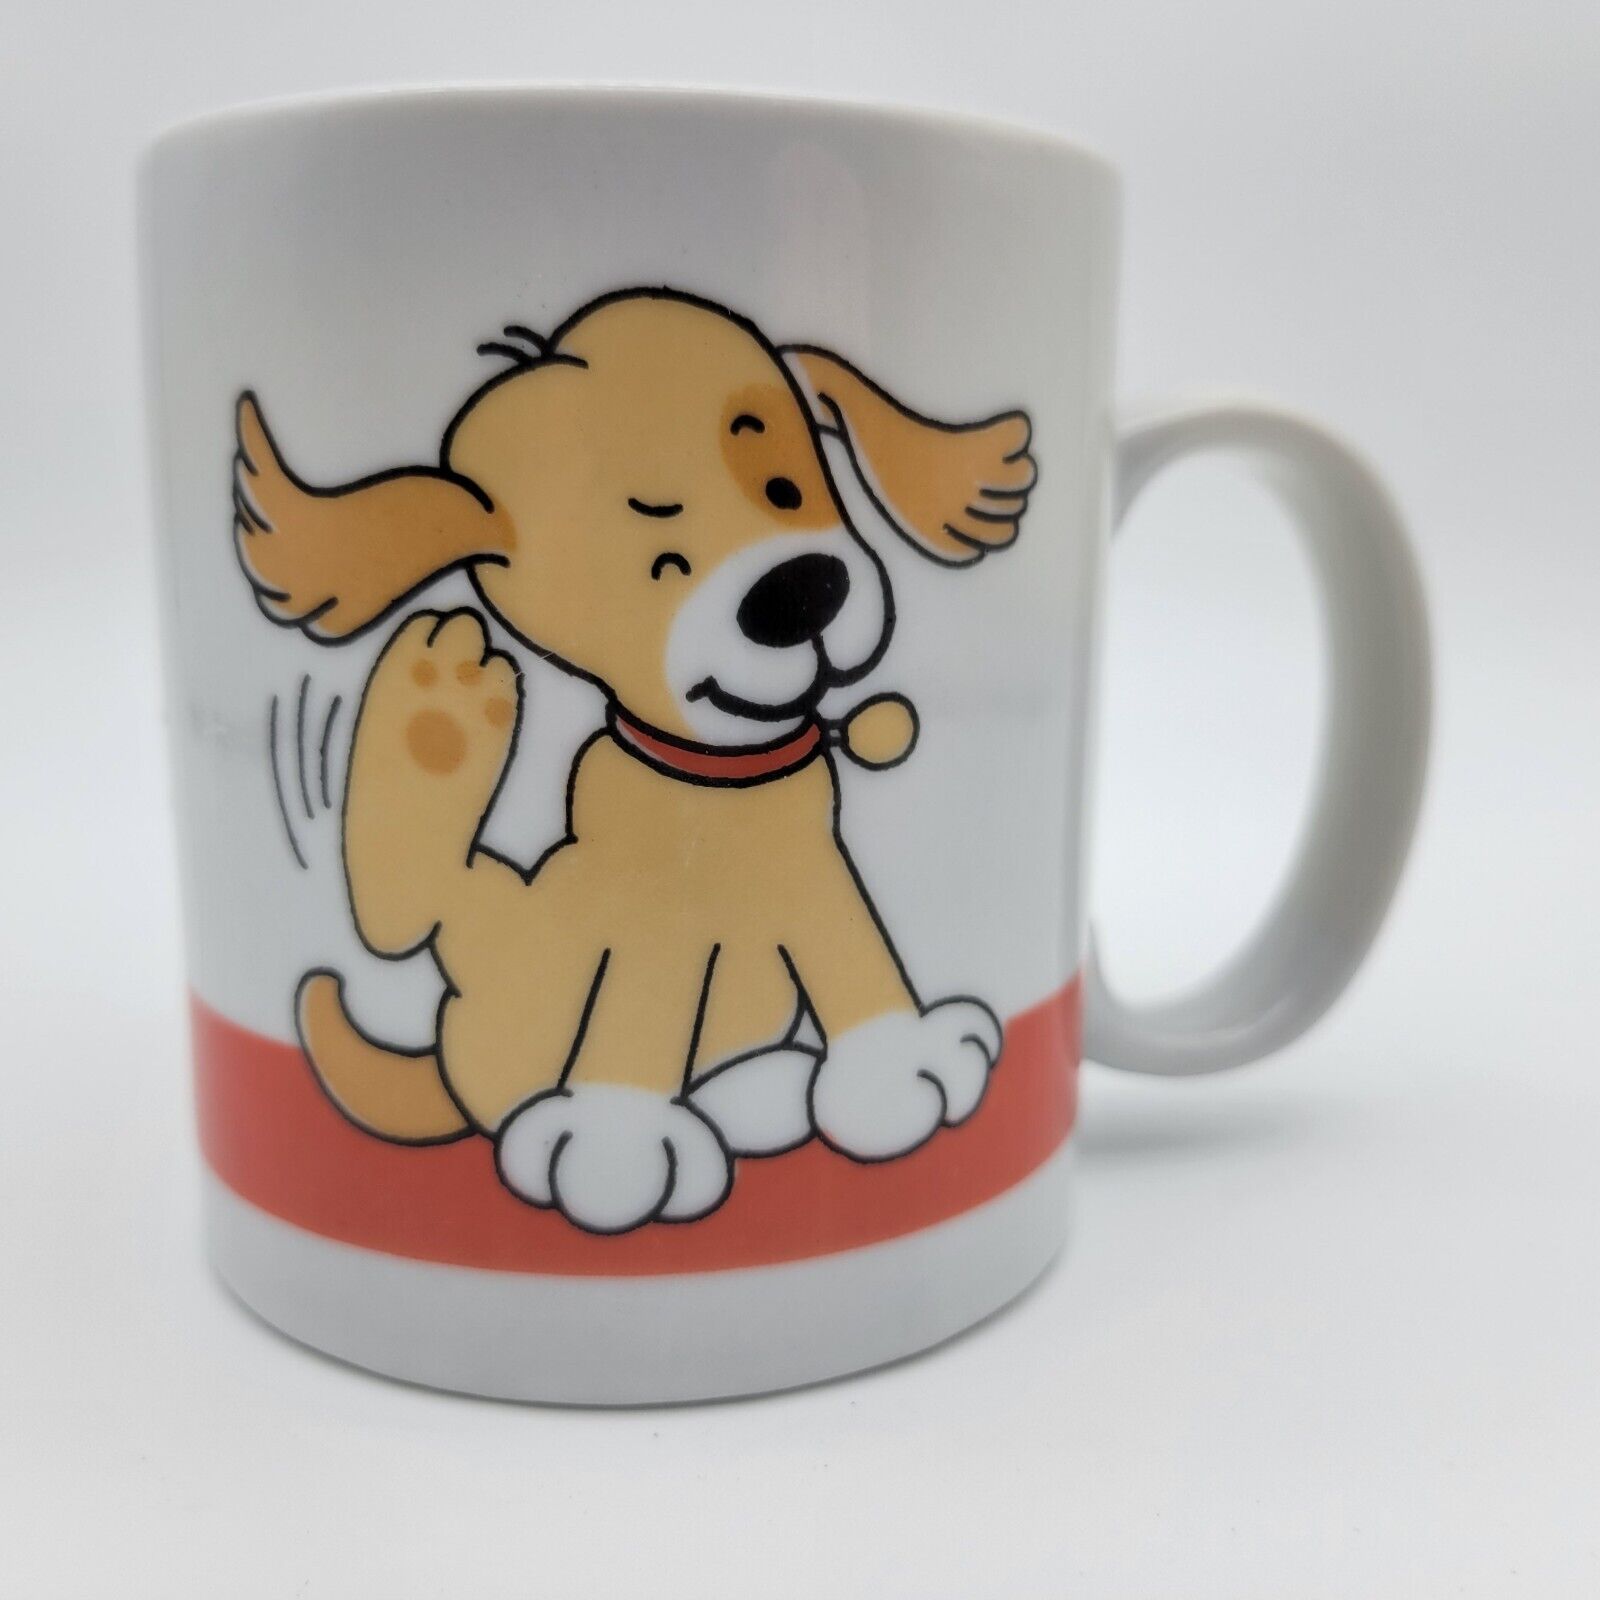 VNTG  Puppy Dog Collectible Coffee Mug JSNY Taiwan Vintage 80s Cute Best Gift 